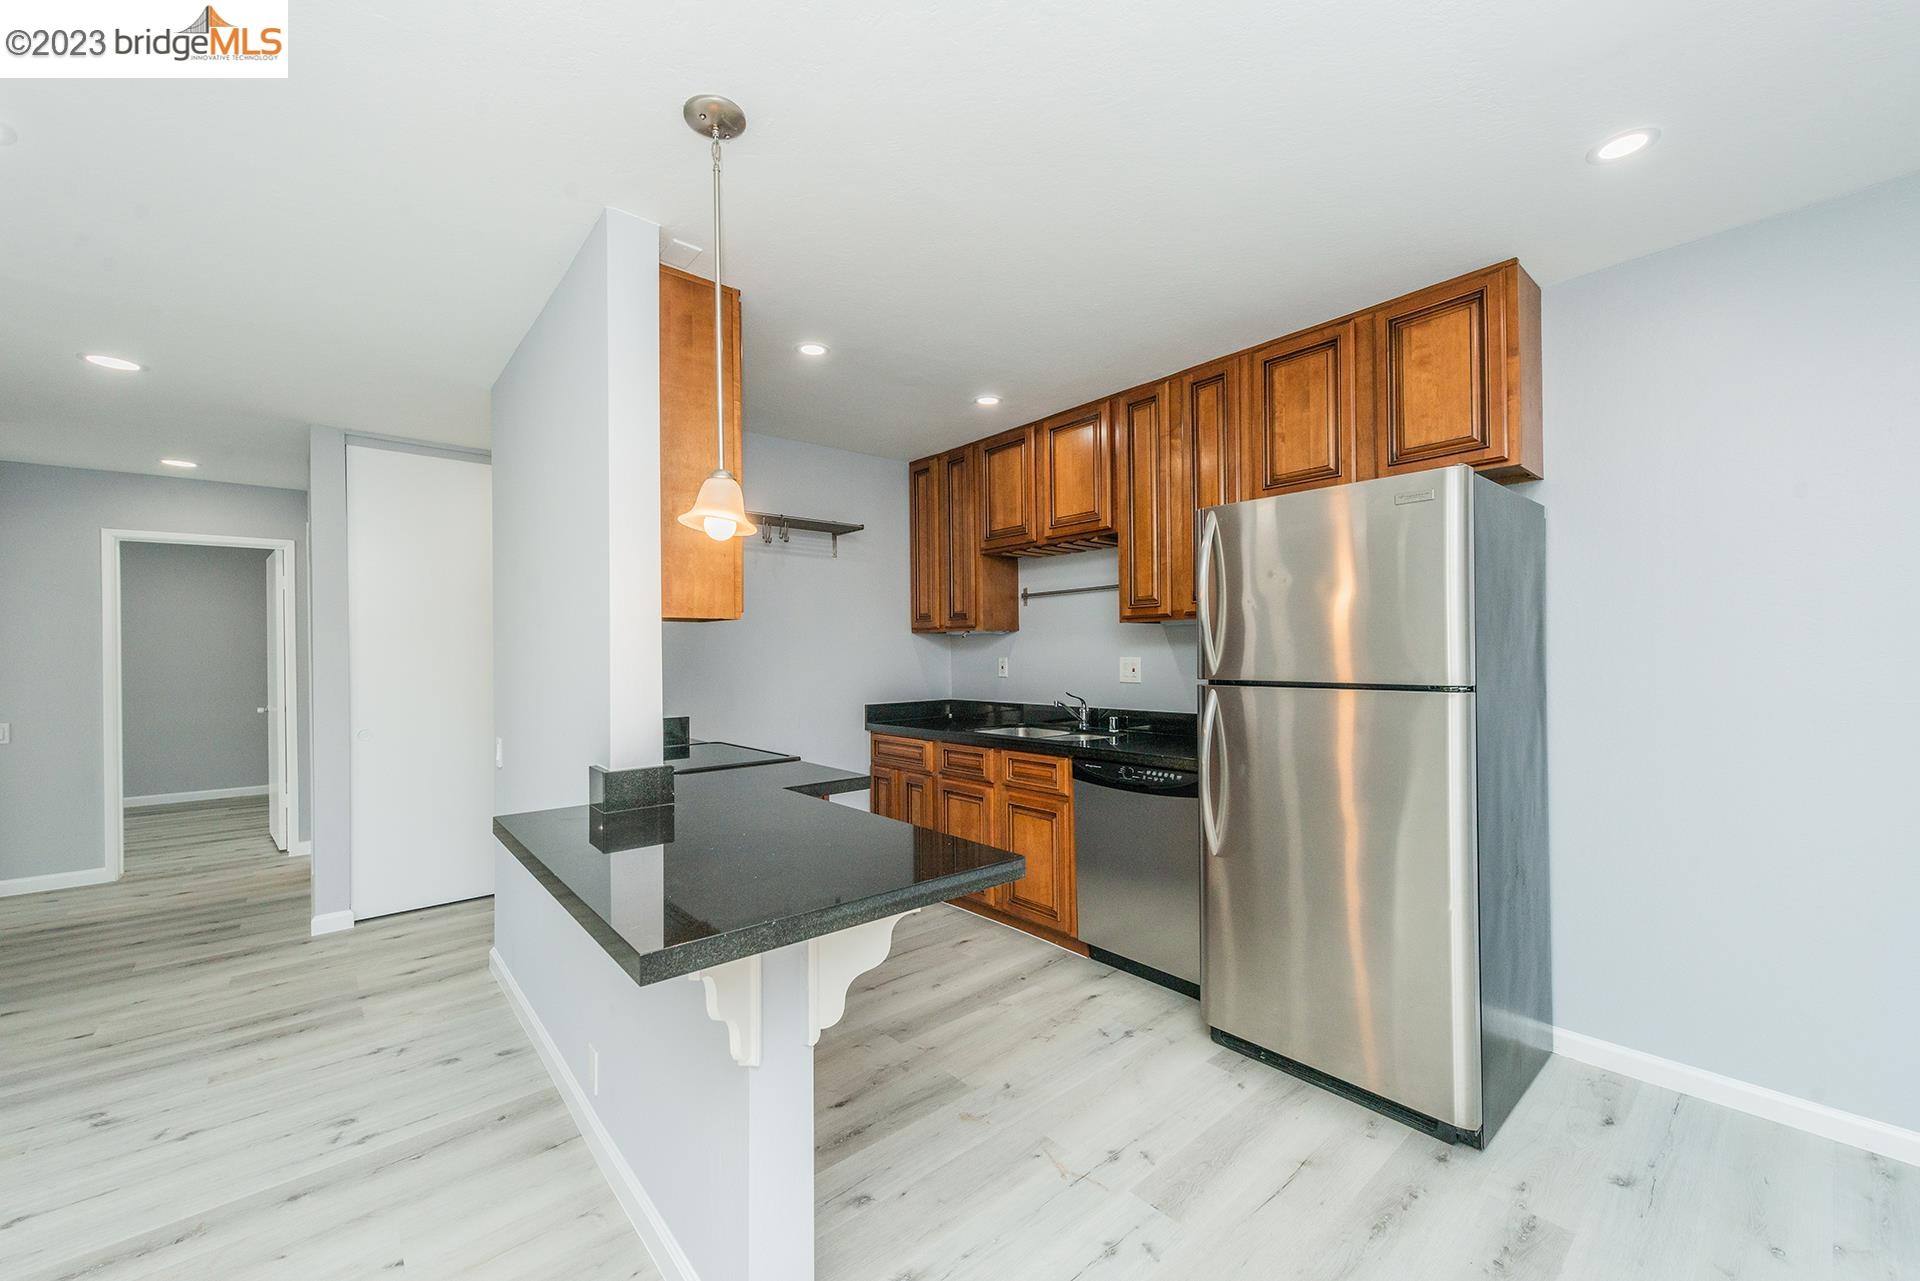 4099 Howe St, #102, Oakland 2/1, 800 Square Feet Available June 1st, 2023 Owner pays Trash & Water! Pets OK! $3,000/ Month   Sunny and Bright 2-bedroom, 1 bathroom Updated condo in the heart of Oakland’s Piedmont Avenue Neighborhood.   This bright condo boasts an amazing location, two bedrooms with ample closet space, functional updated kitchen, charming sunny living room, a nice spacious bathroom, plus an enclosed sunroom! This first floor condo (one level above street) is blocks from the Kaiser campus, Piedmont Avenue, restaurants, cafes, shops, and with easy access to BART, bus lines and freeways!    Here are a few more highlights of the home: • Secure entry with intercom & elevator  • Stylishly updated unit  • First floor unit (above secure ground floor parking garage) Not on ground floor • Entire interior freshly painted • Private Enclosed Patio • Engineered wood flooring throughout • Great neighborhood! Home is located at the heart of Piedmont Avenue shopping, restaurants, schools, and public transportation • 1 dedicated parking space • Pets considered on a case-by-case basis